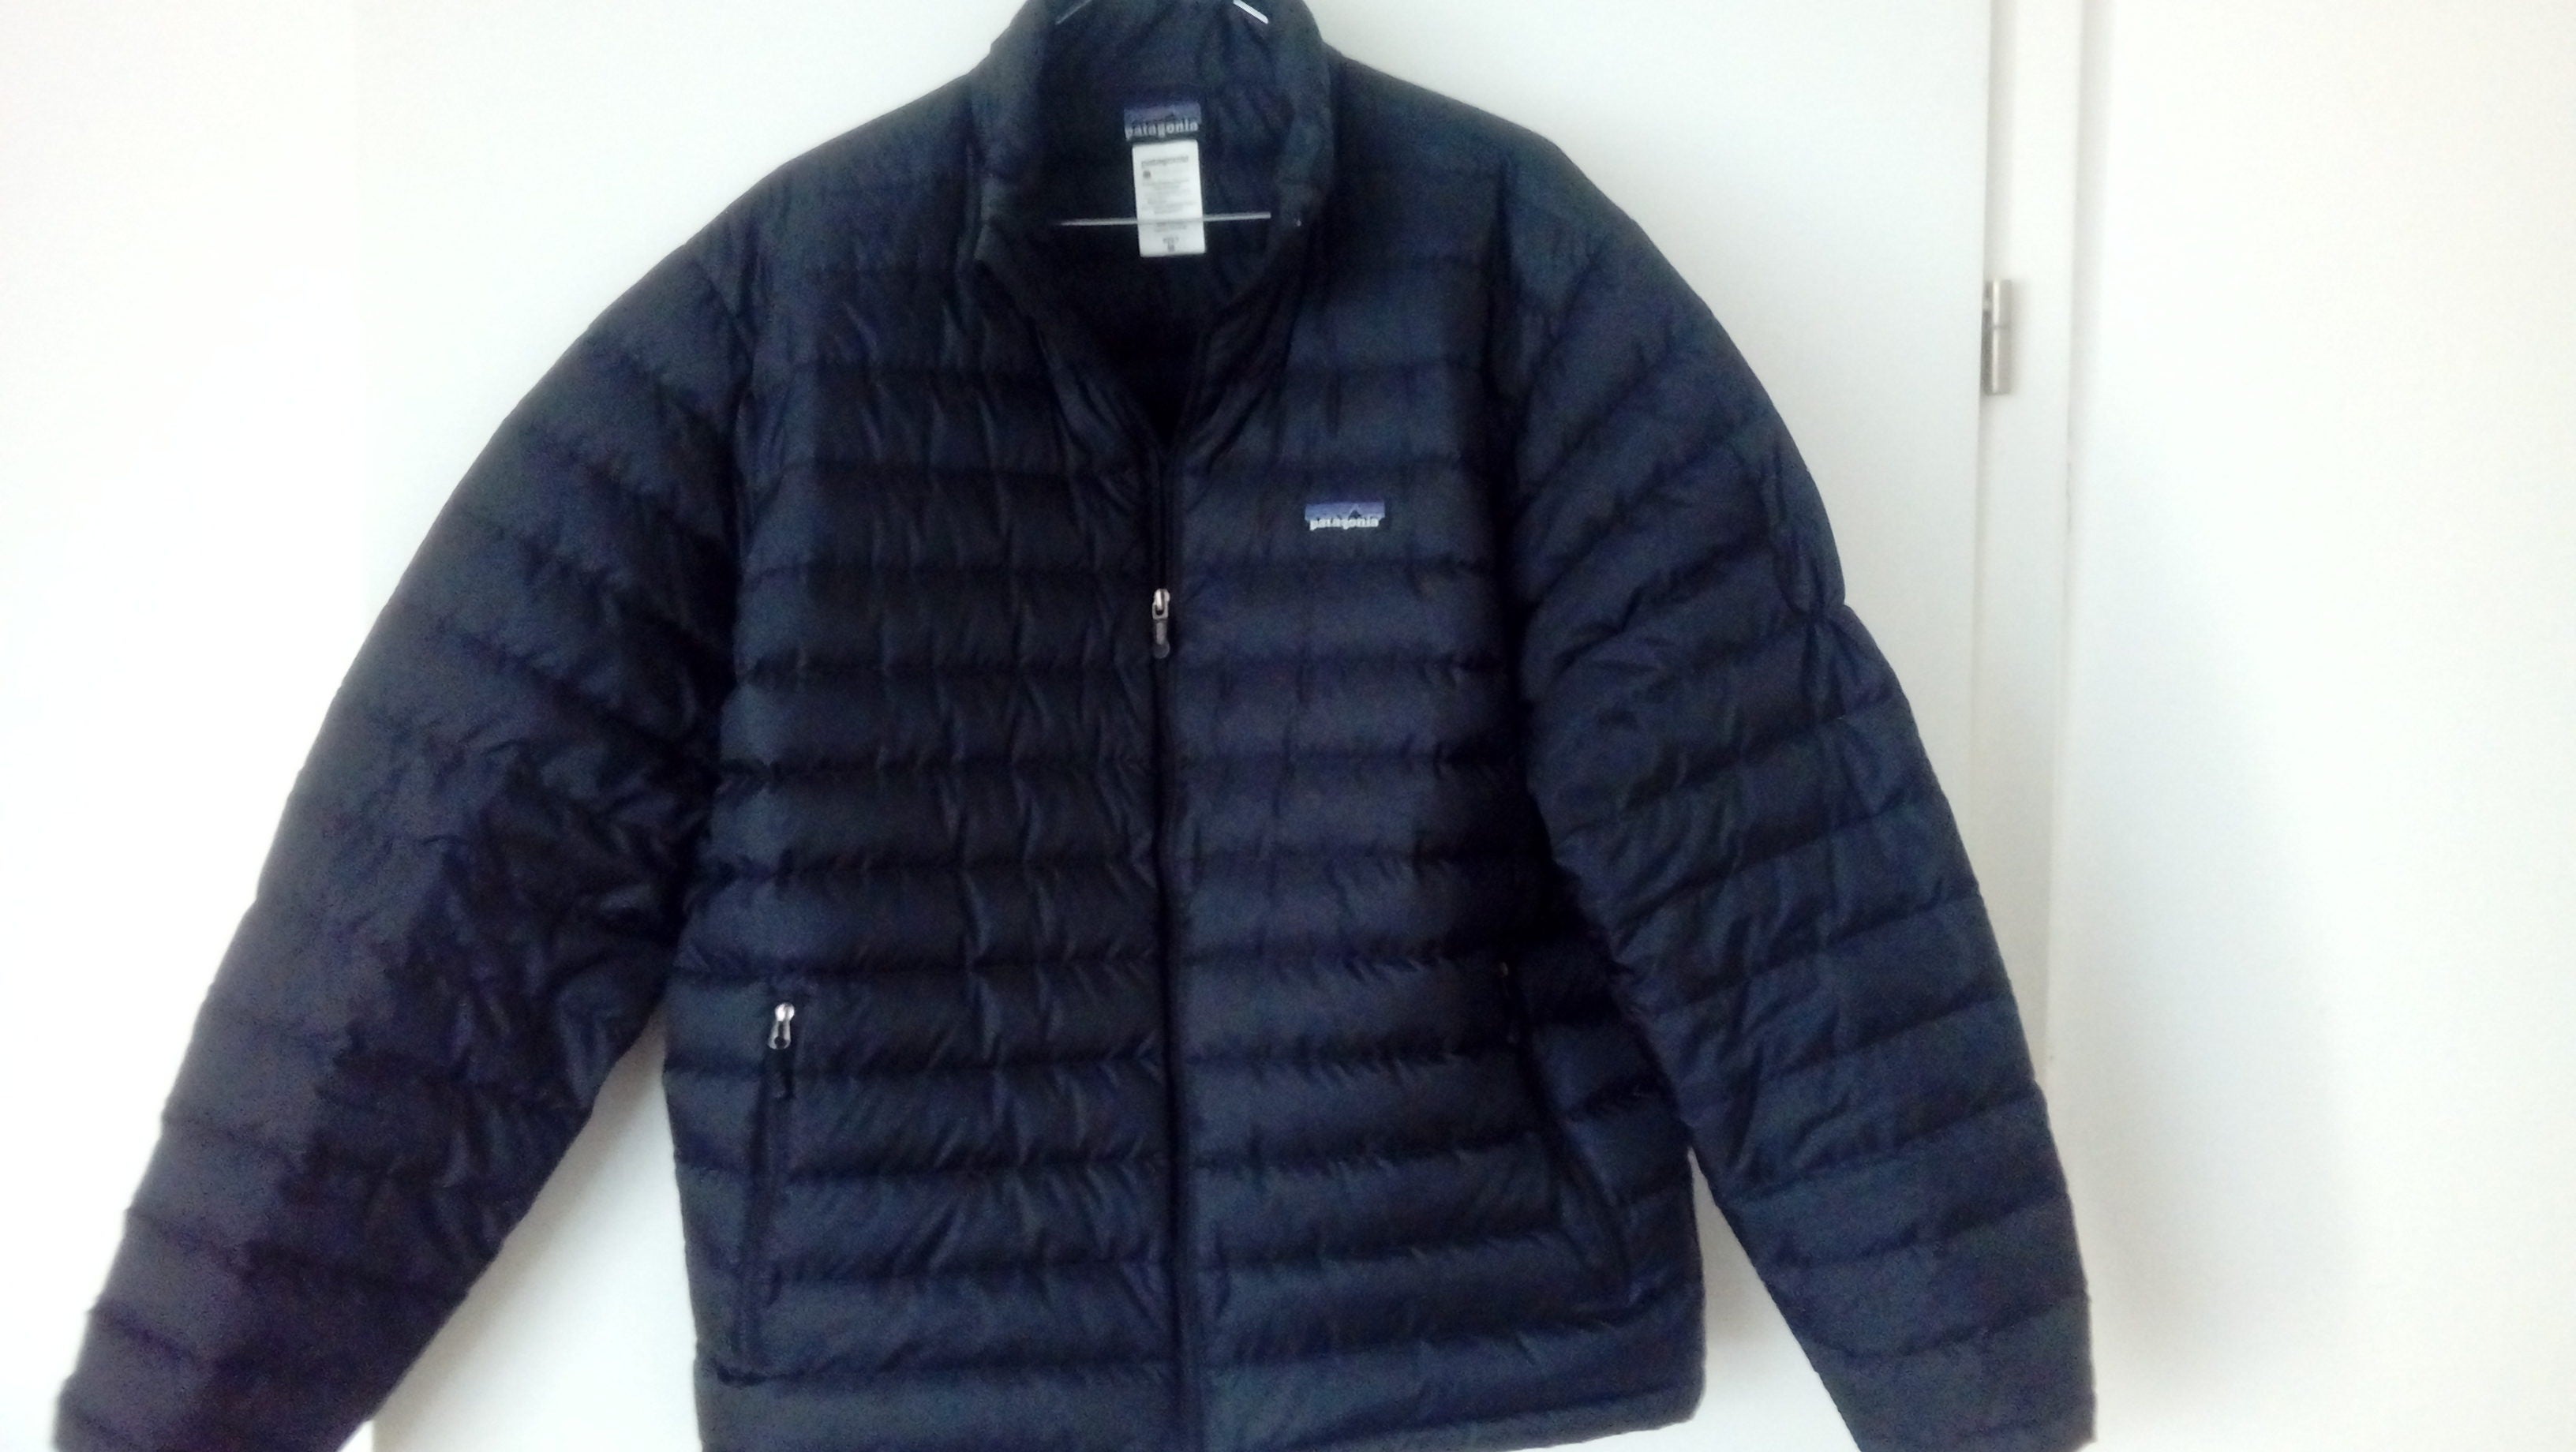 Patagonia Jacket real or fake? - RedFlagDeals.com Forums